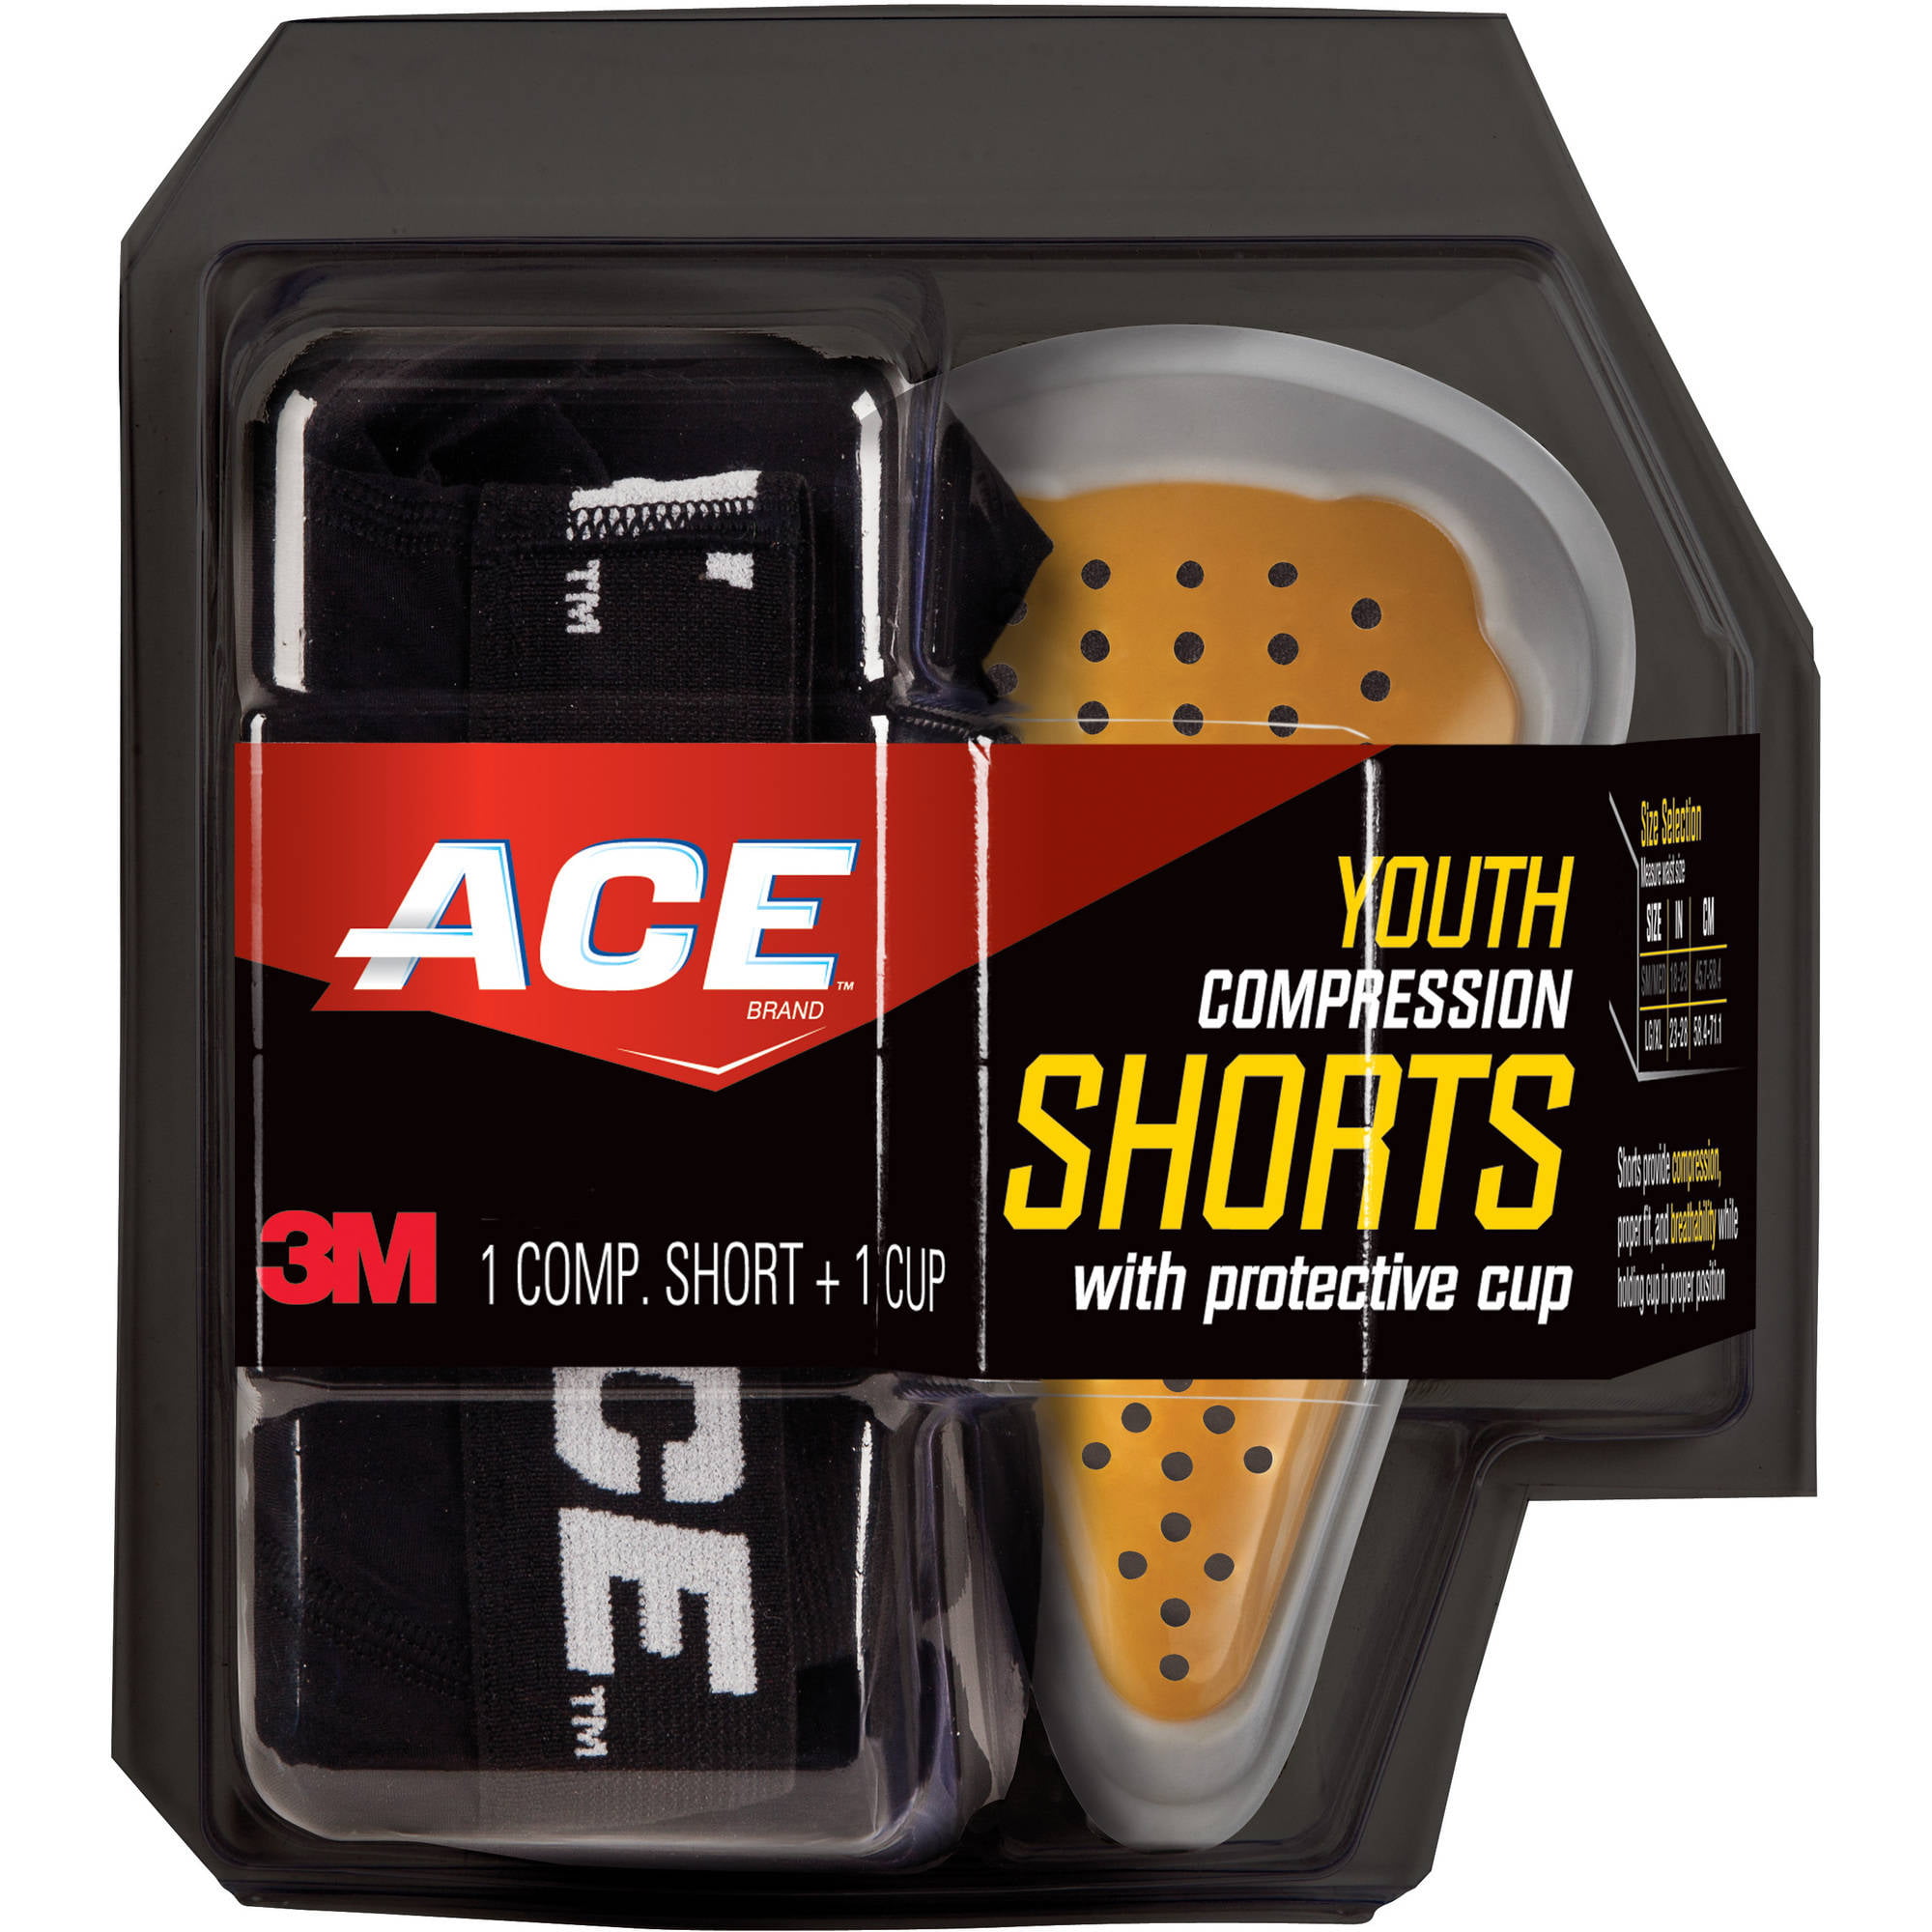 3m ACE Teen Compression Shorts With Protective Cup LG XL Breathable Comfort for sale online 